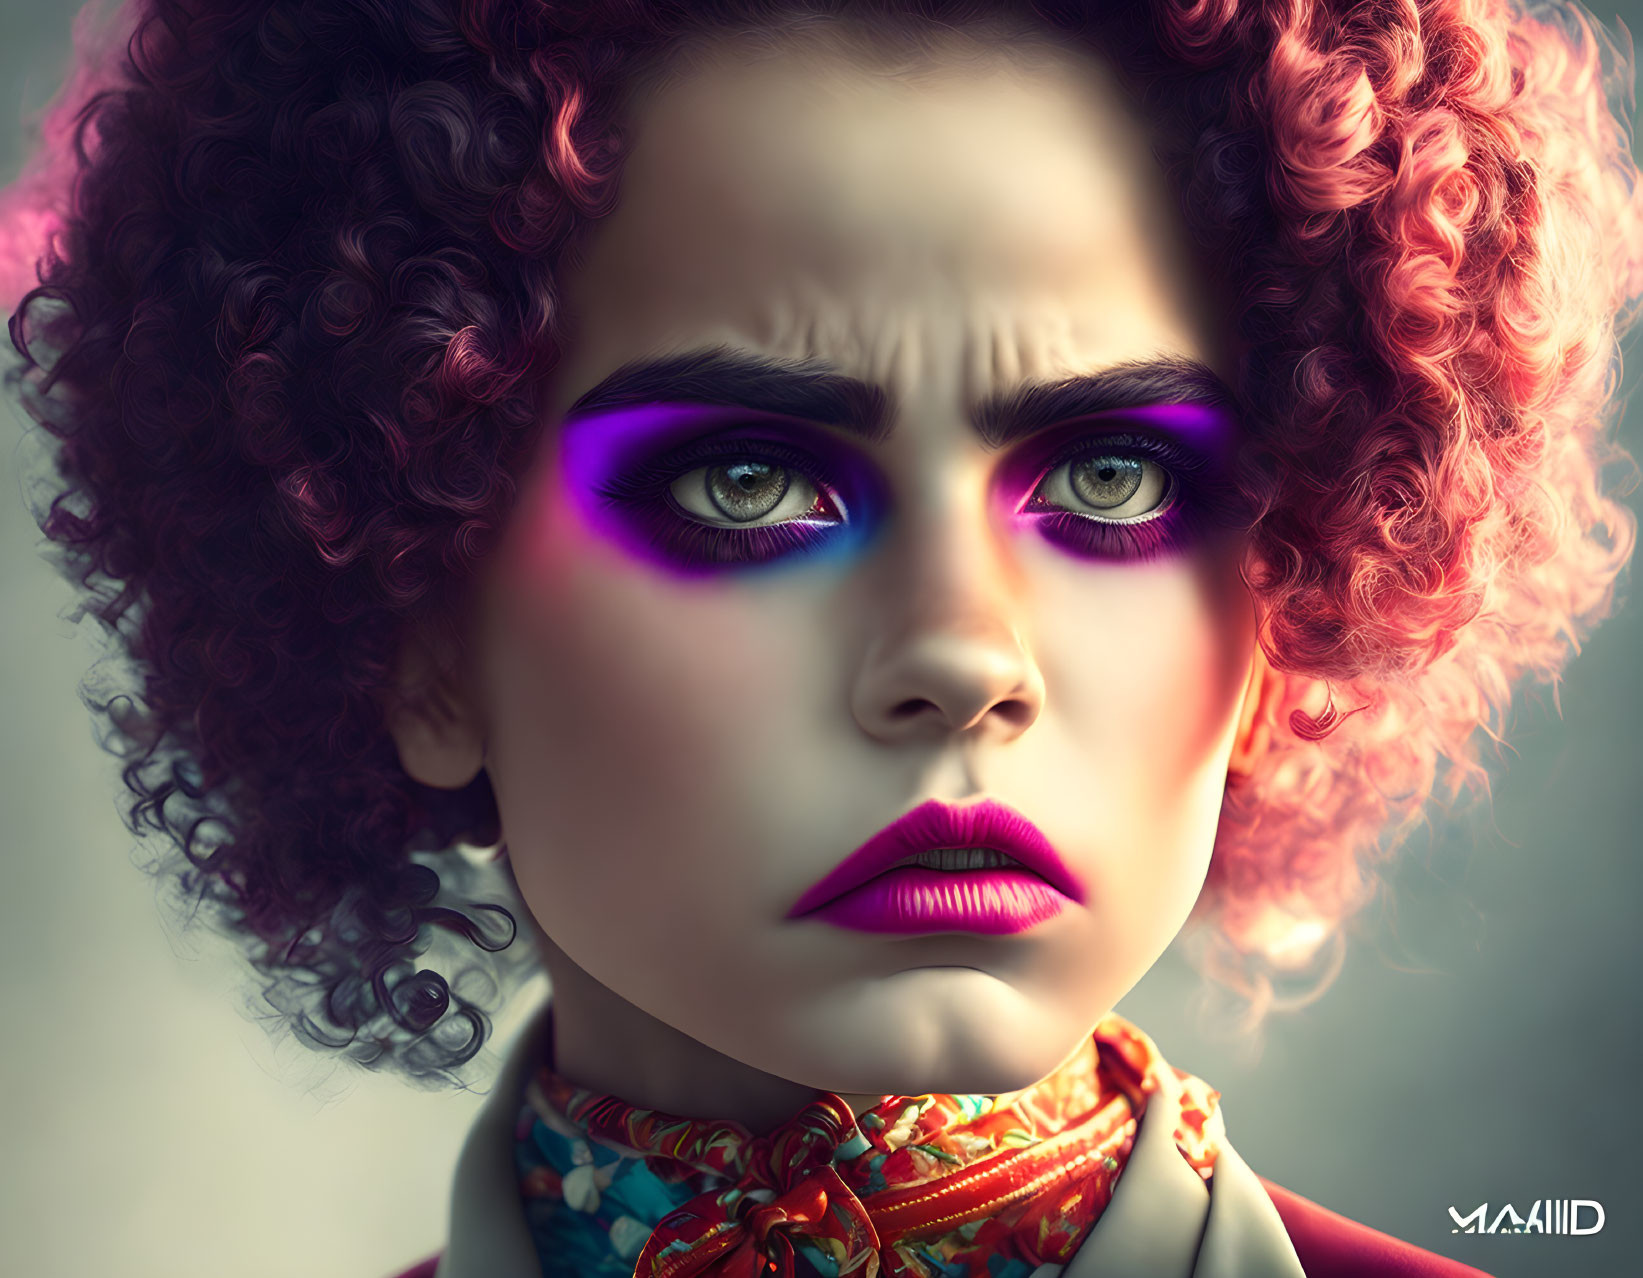 Intense gaze and colorful makeup portrait on neutral background